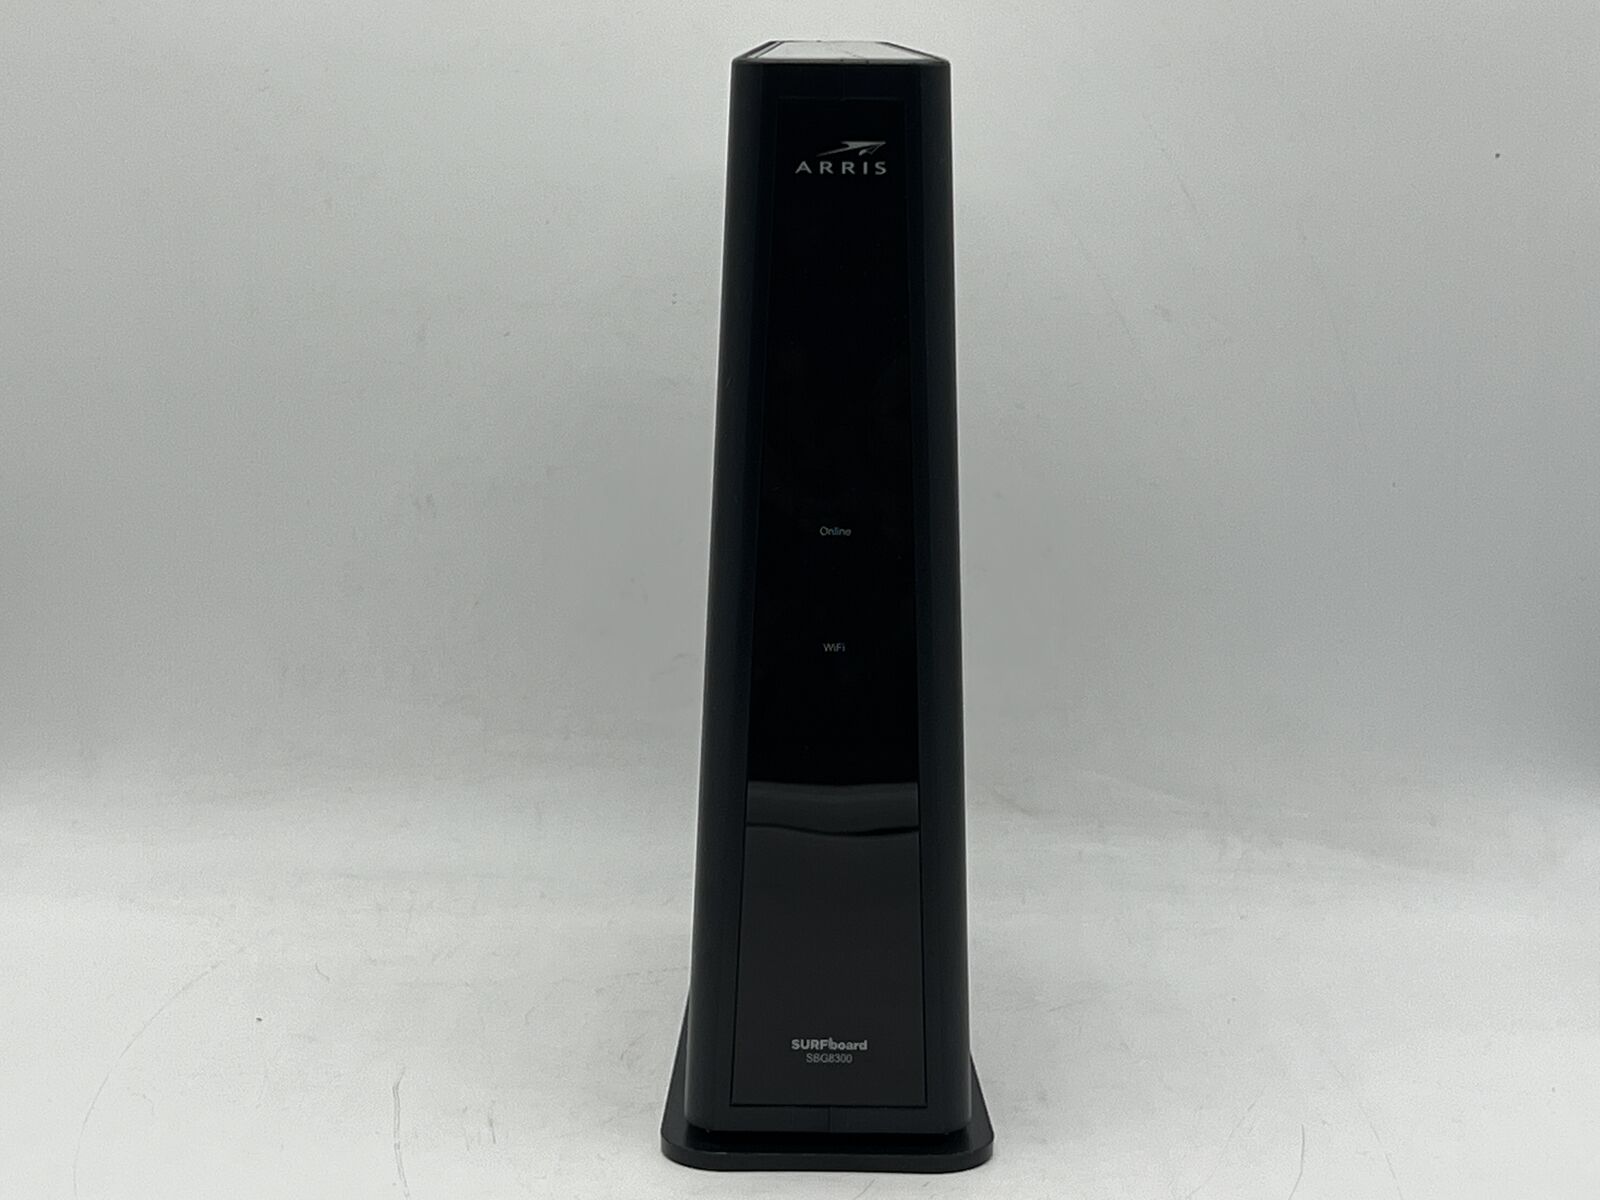 Arris SBG8300 SURFboard DOCSIS 3.1 Cable Modem 4Gbps No Adapter Used